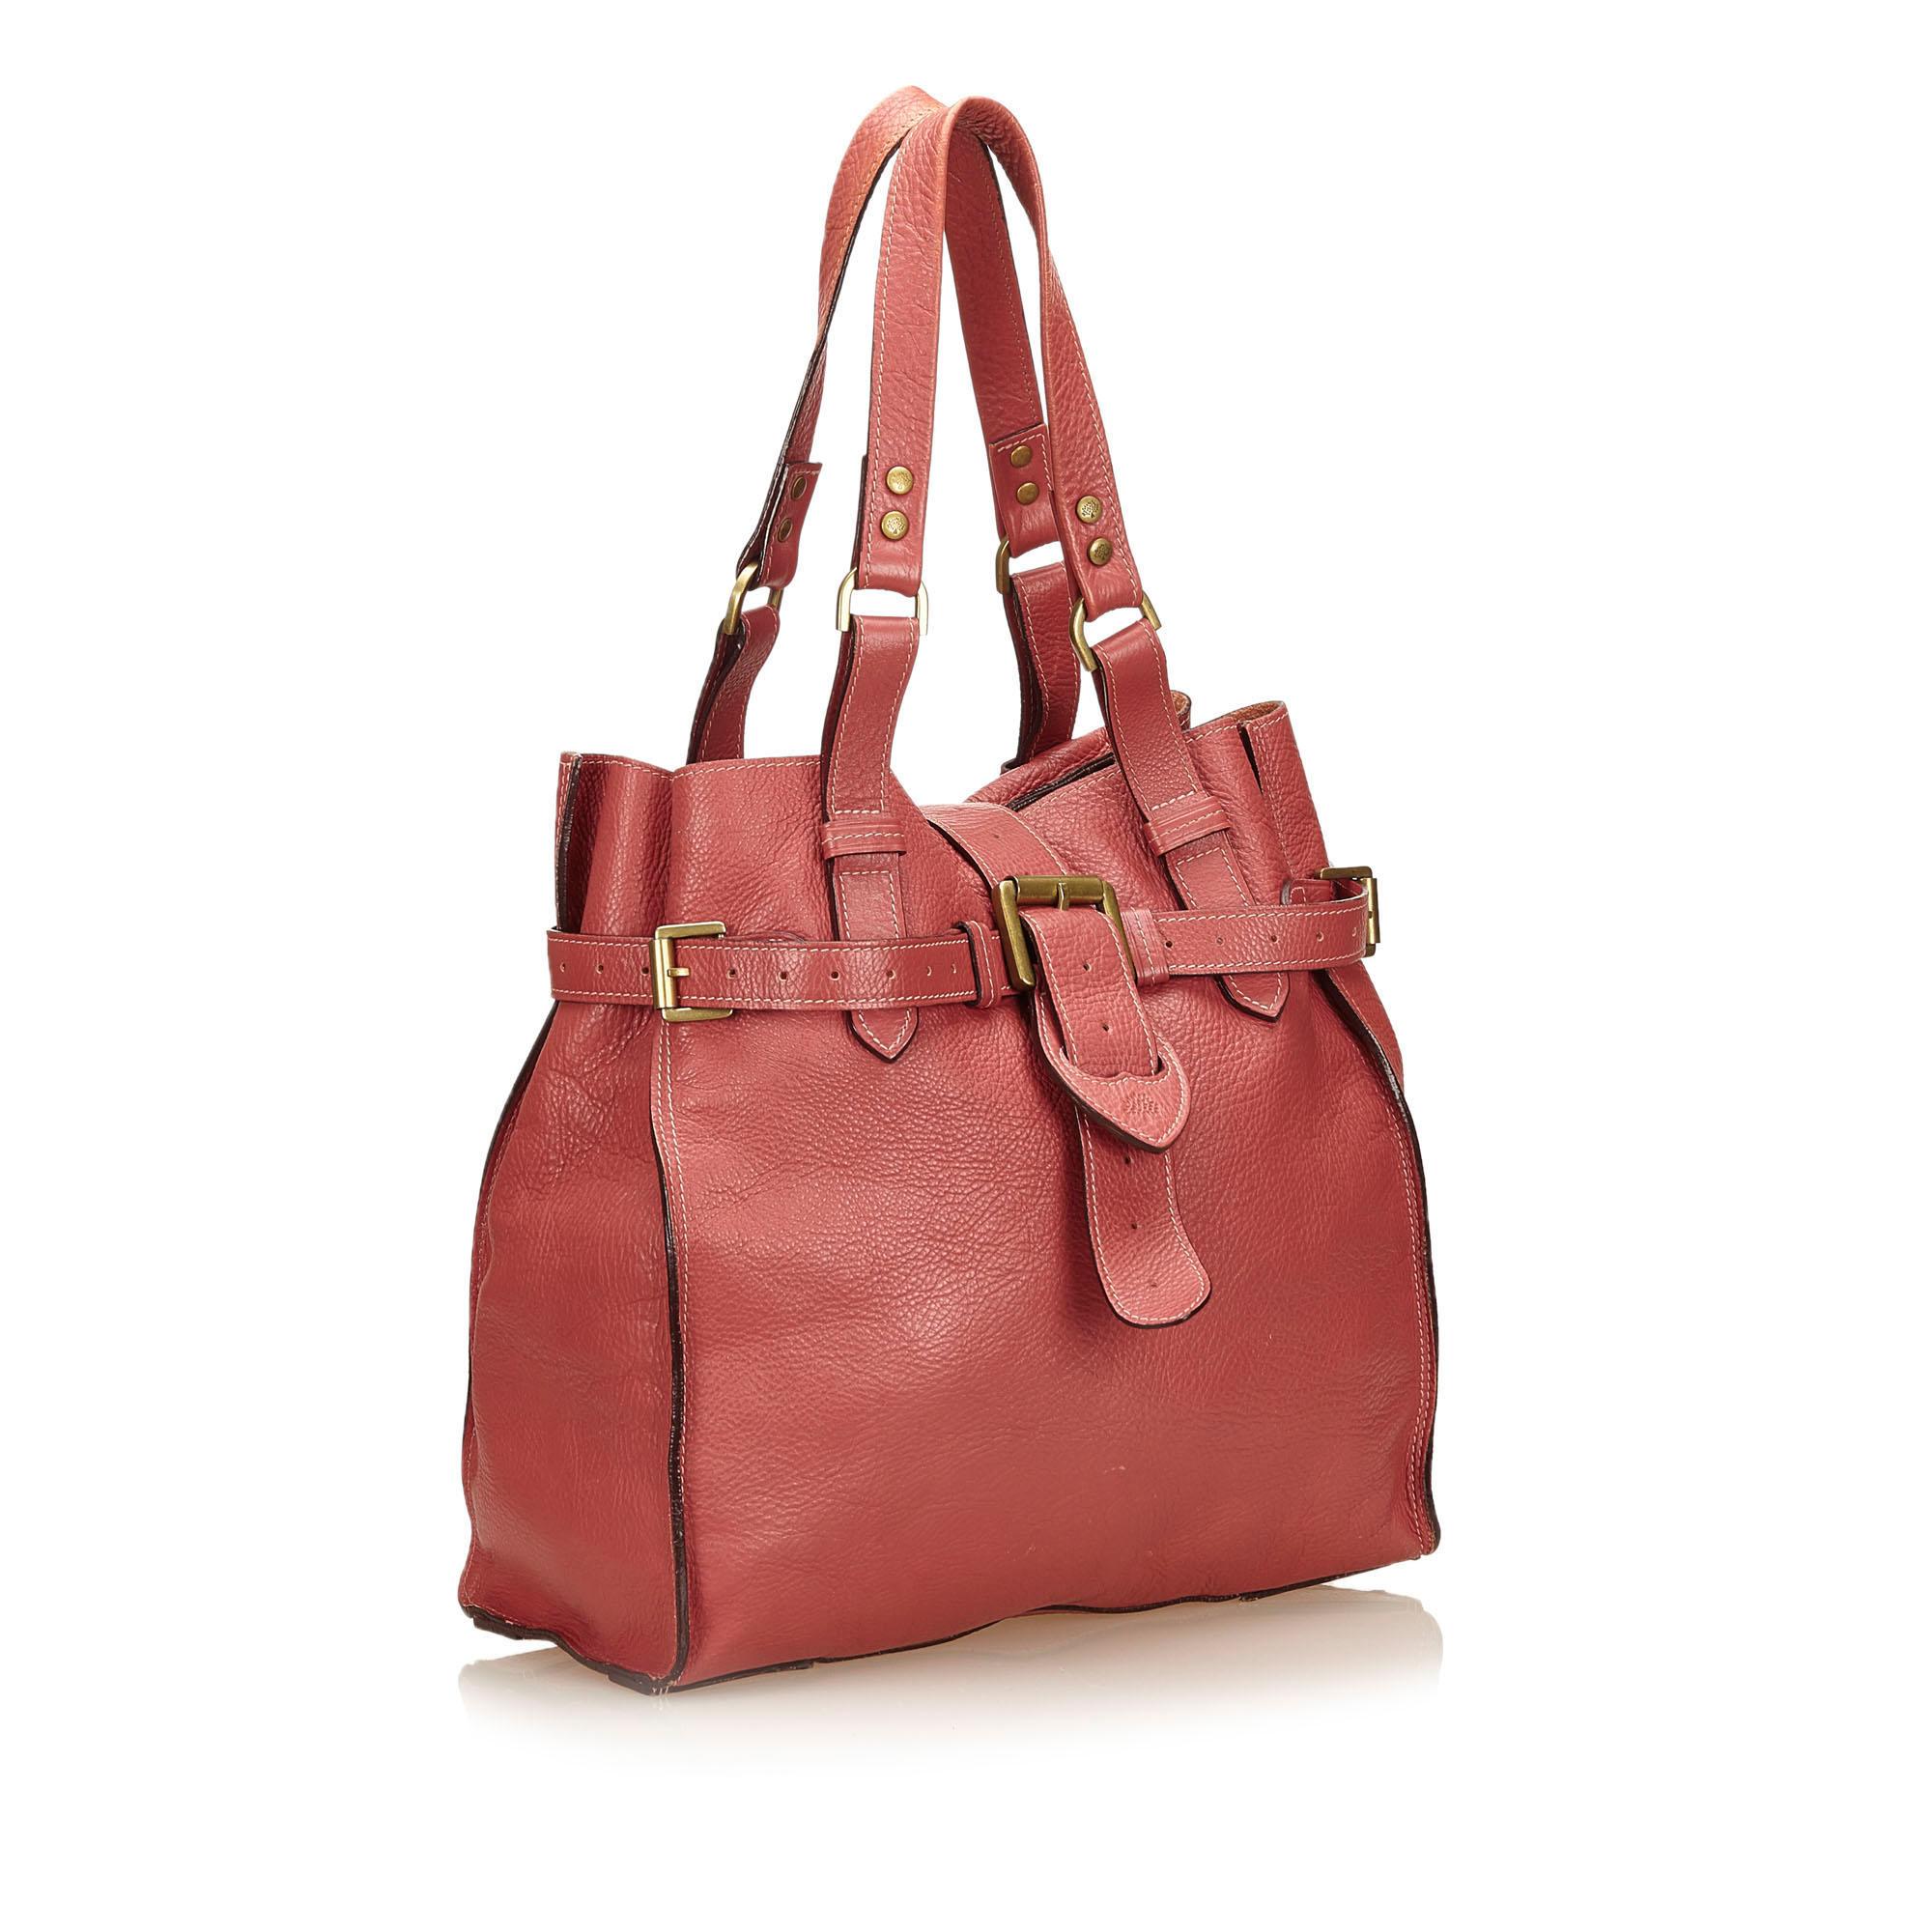 This shoulder bag features a leather body with belt details, flat leather straps, front flap with belt details, and interior zip pocket. It carries as B condition rating.

Inclusions: 
This item does not come with inclusions.

Dimensions:
Length: